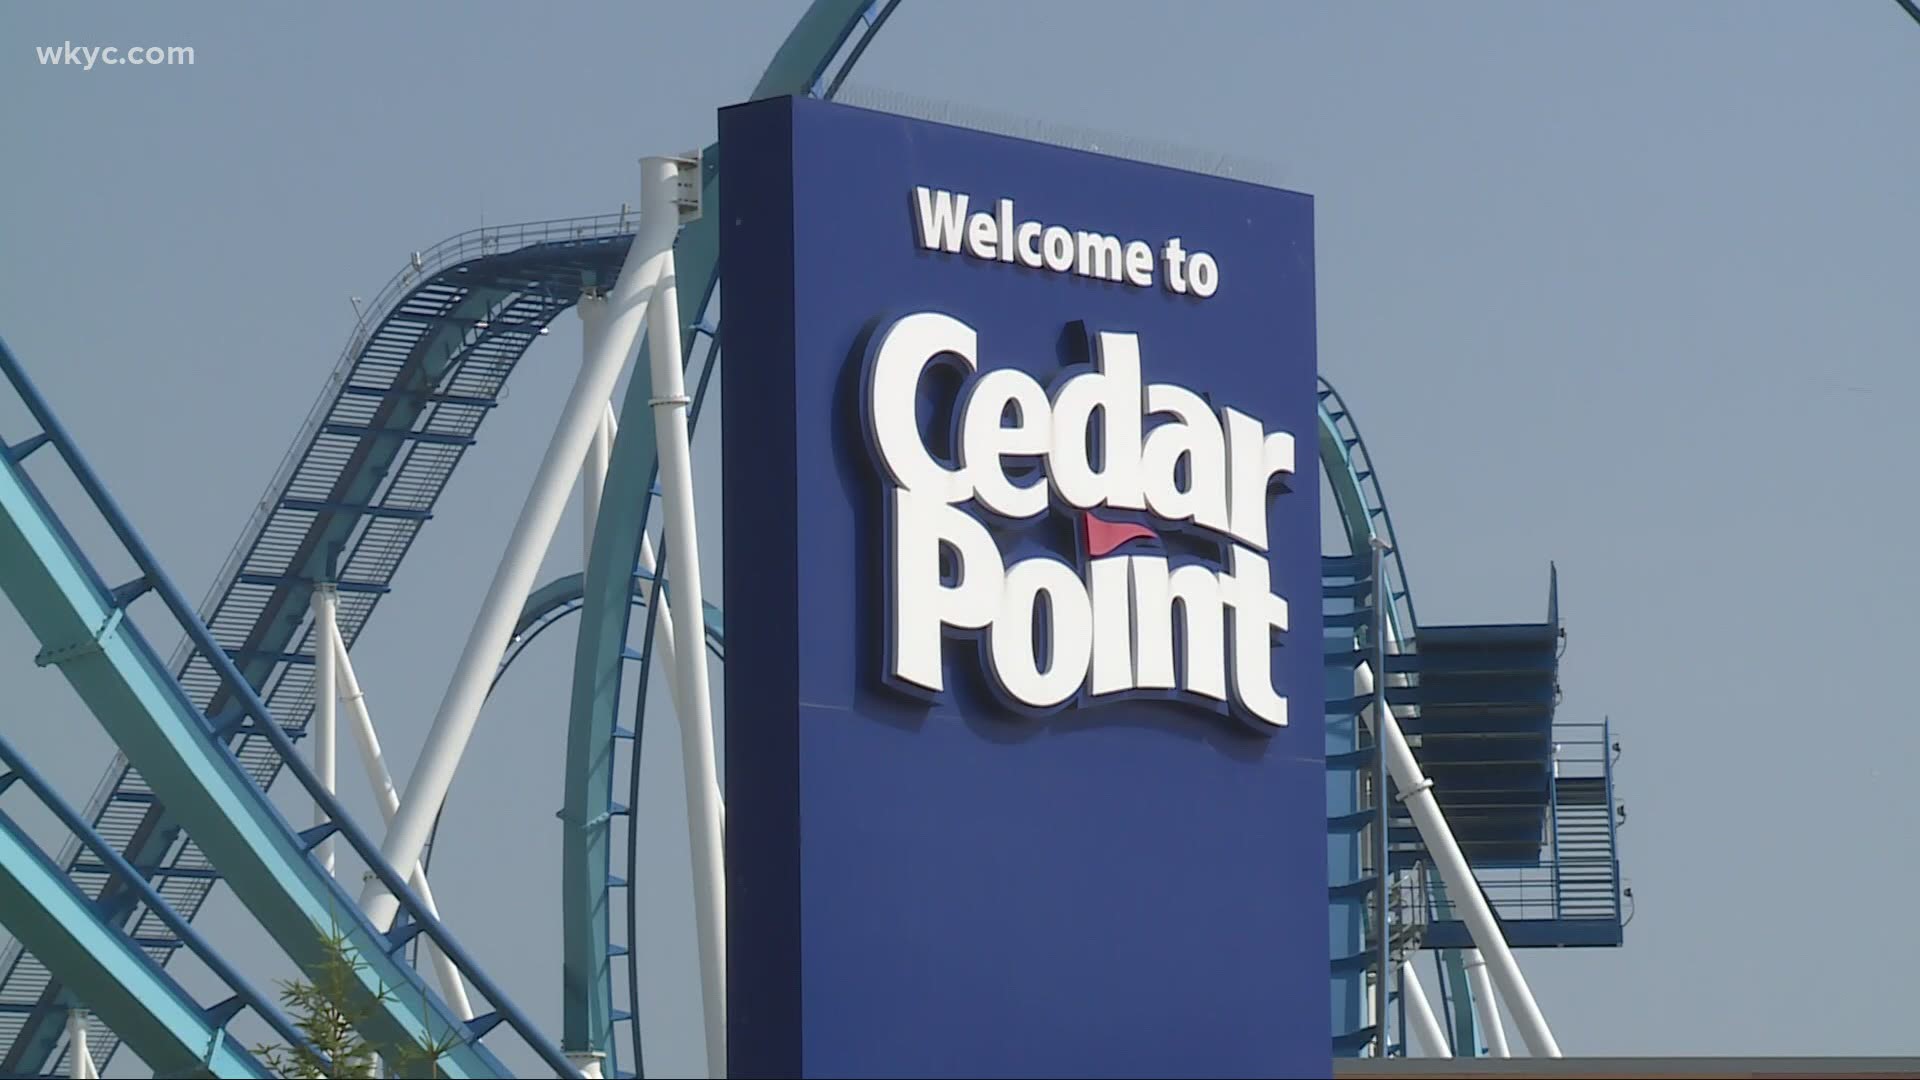 Cedar Point opened today with shortened hours and safety requirements